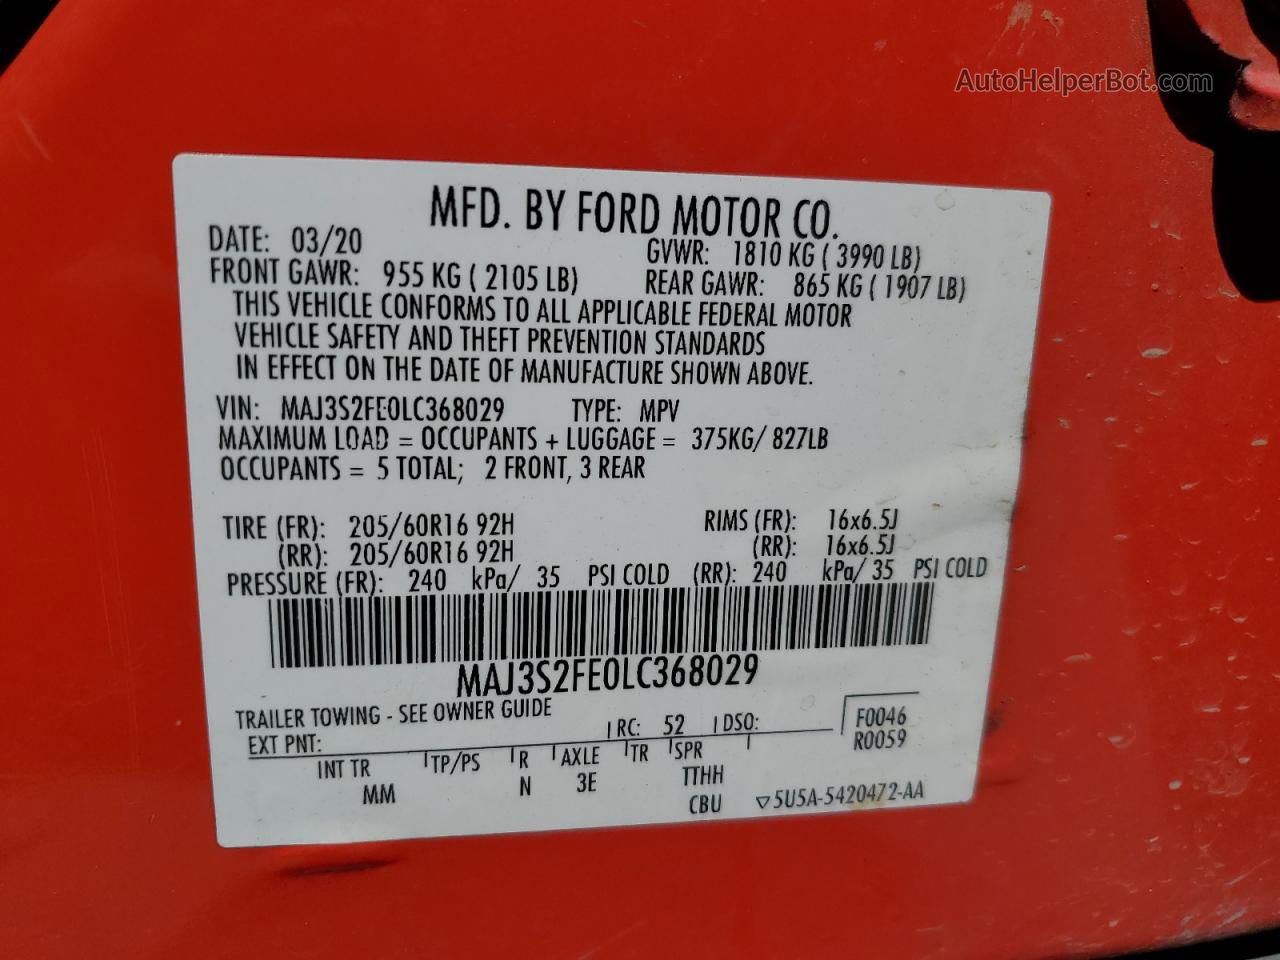 2020 Ford Ecosport S Red vin: MAJ3S2FE0LC368029